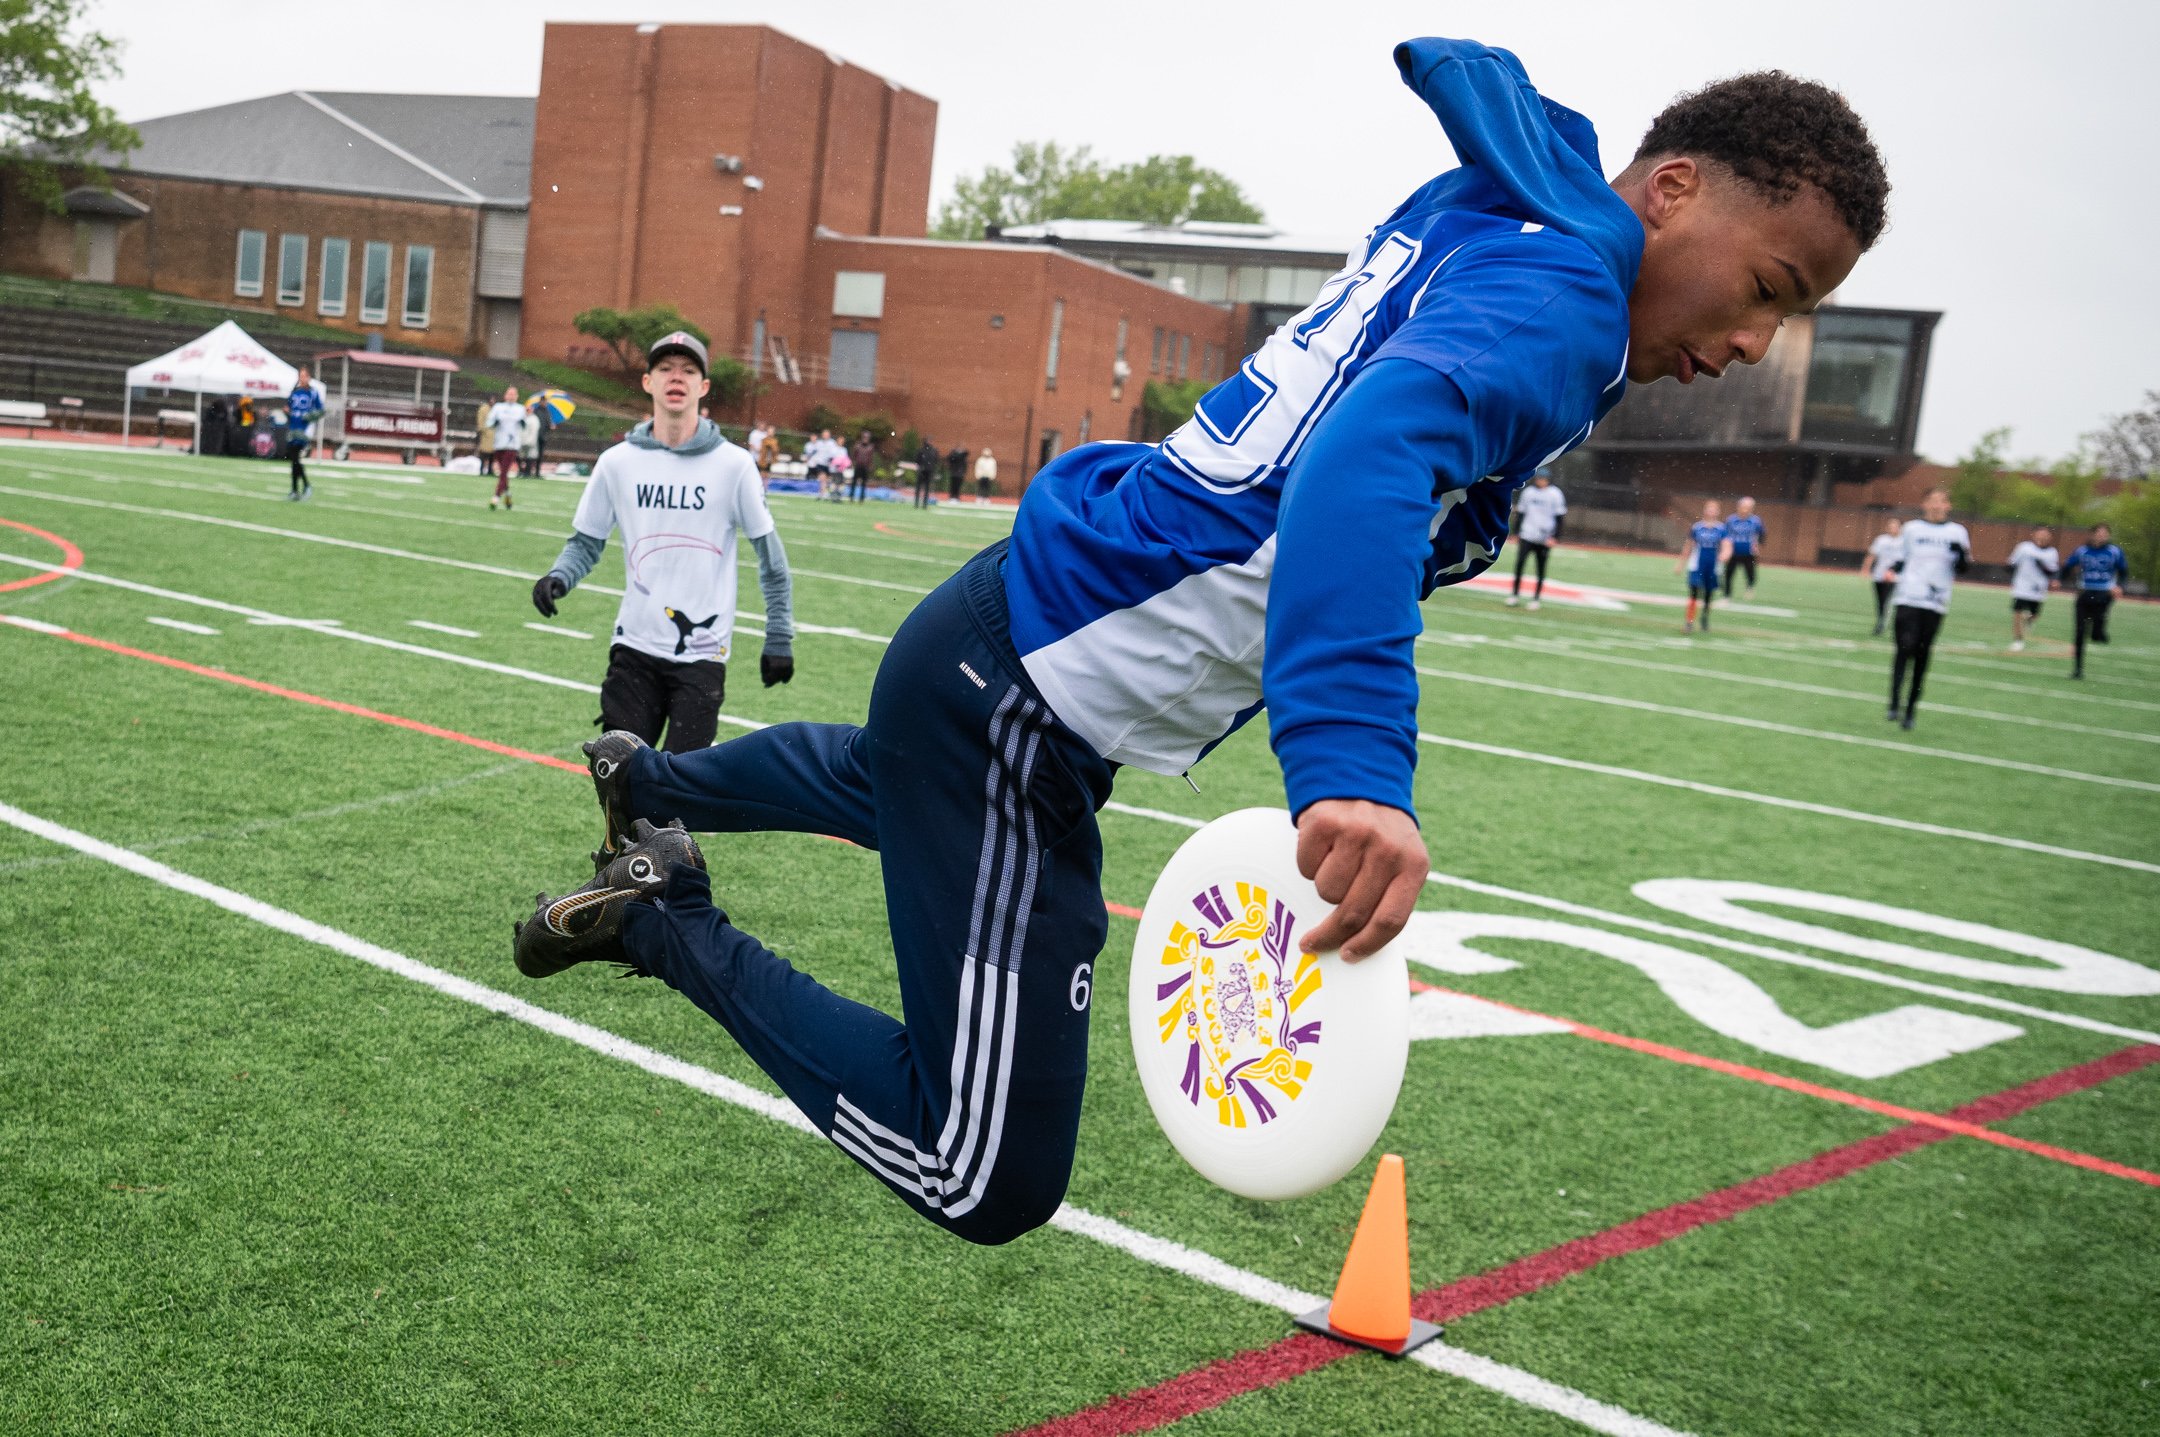  DC International School player Kadin Nuri attempts a diving catch in the end zone, landing just out of bounds in a semi-finals game against the School Without Walls, during the DCSAA High School State Ultimate Championships at Sidwell Friends School